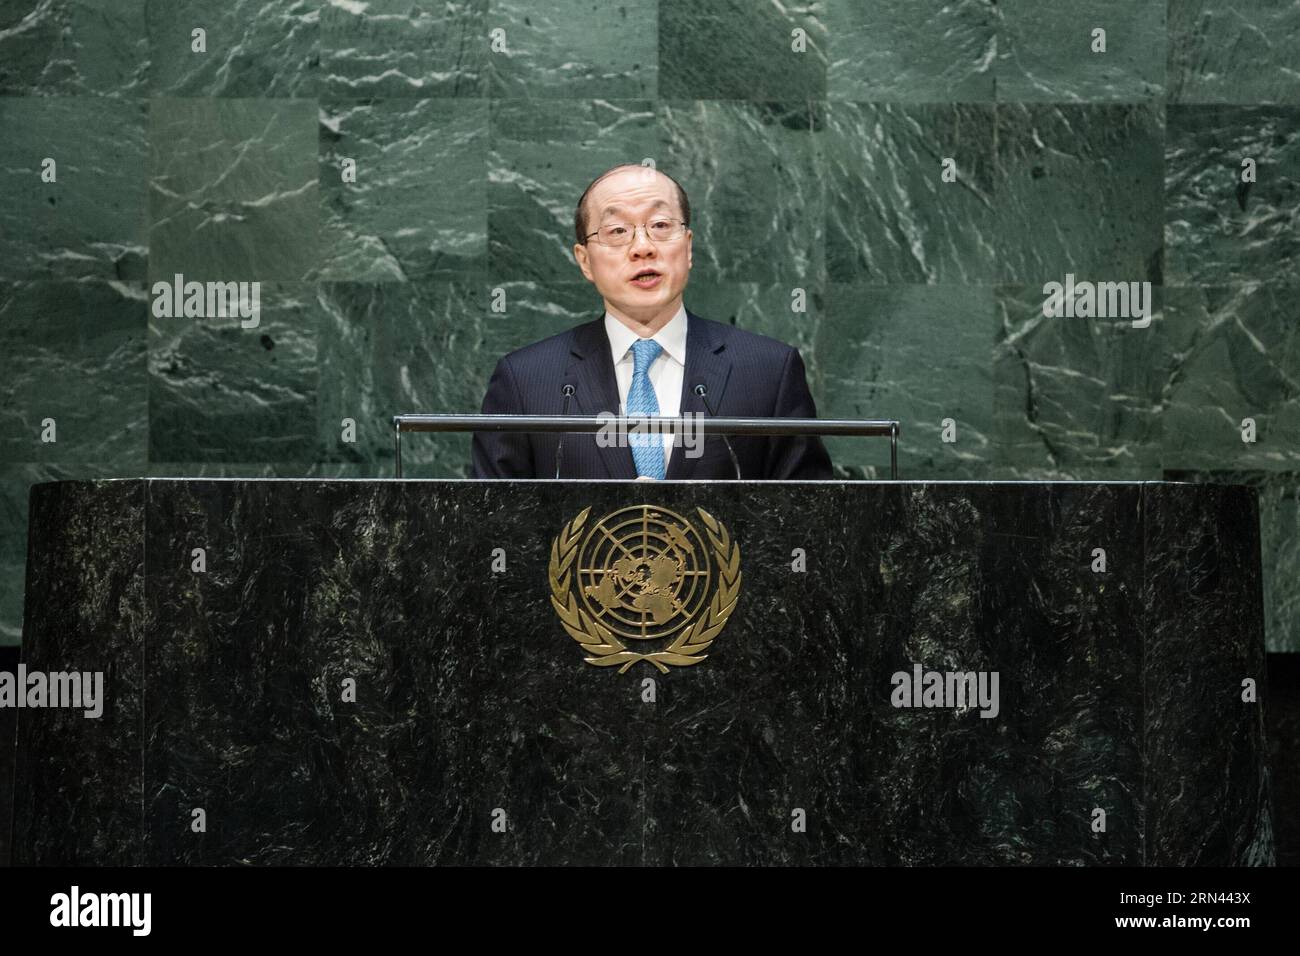 (150505) -- NEW YORK, May 5, 2015 -- Liu Jieyi, China s permanent representative to the United Nations, speaks during a UN General Assembly s special meeting to commemorate all victims of WWII at the UN headquarters in New York on May 5, 2015. A UN General Assembly (GA) special meeting kicked off here on Tuesday to commemorate victims of the Second World War. ) UN-NEW YORK-WWII-COMMEMORATION LixMuzi PUBLICATIONxNOTxINxCHN   New York May 5 2015 Liu Jieyi China S permanently Representative to The United Nations Speaks during a UN General Assembly S Special Meeting to commemorate All Victims of W Stock Photo